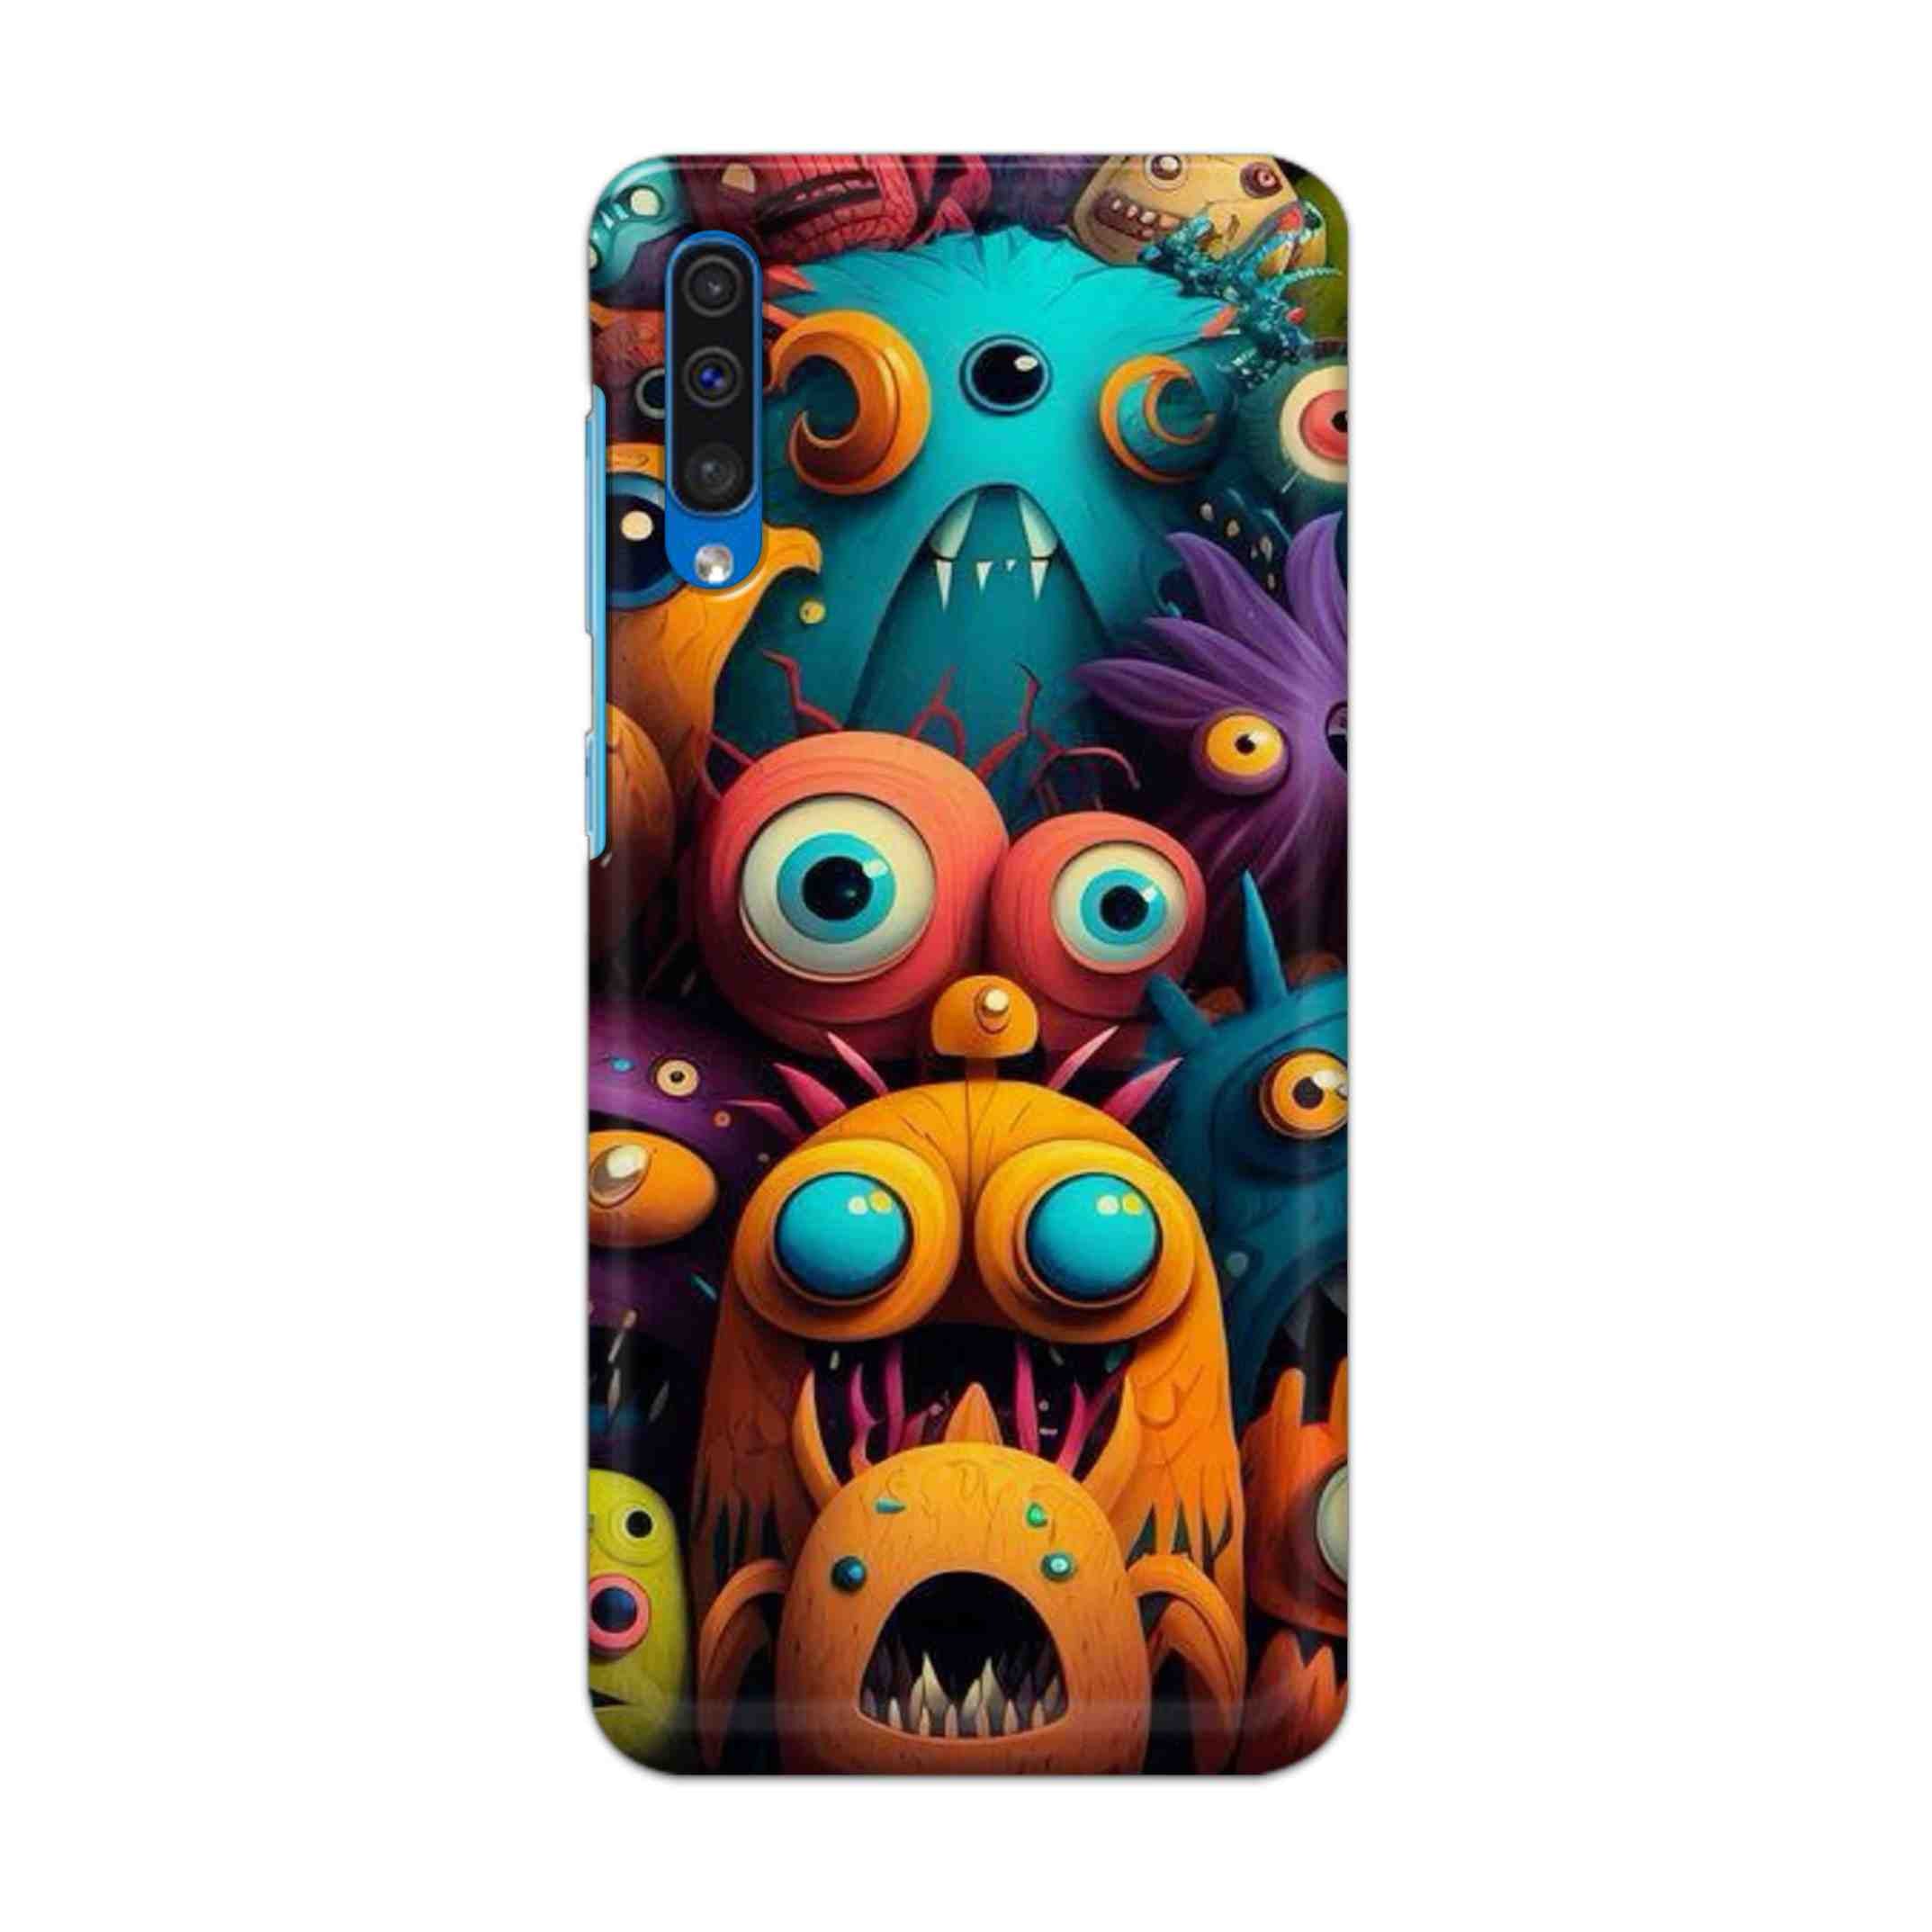 Buy Zombie Hard Back Mobile Phone Case Cover For Samsung Galaxy A50 / A50s / A30s Online